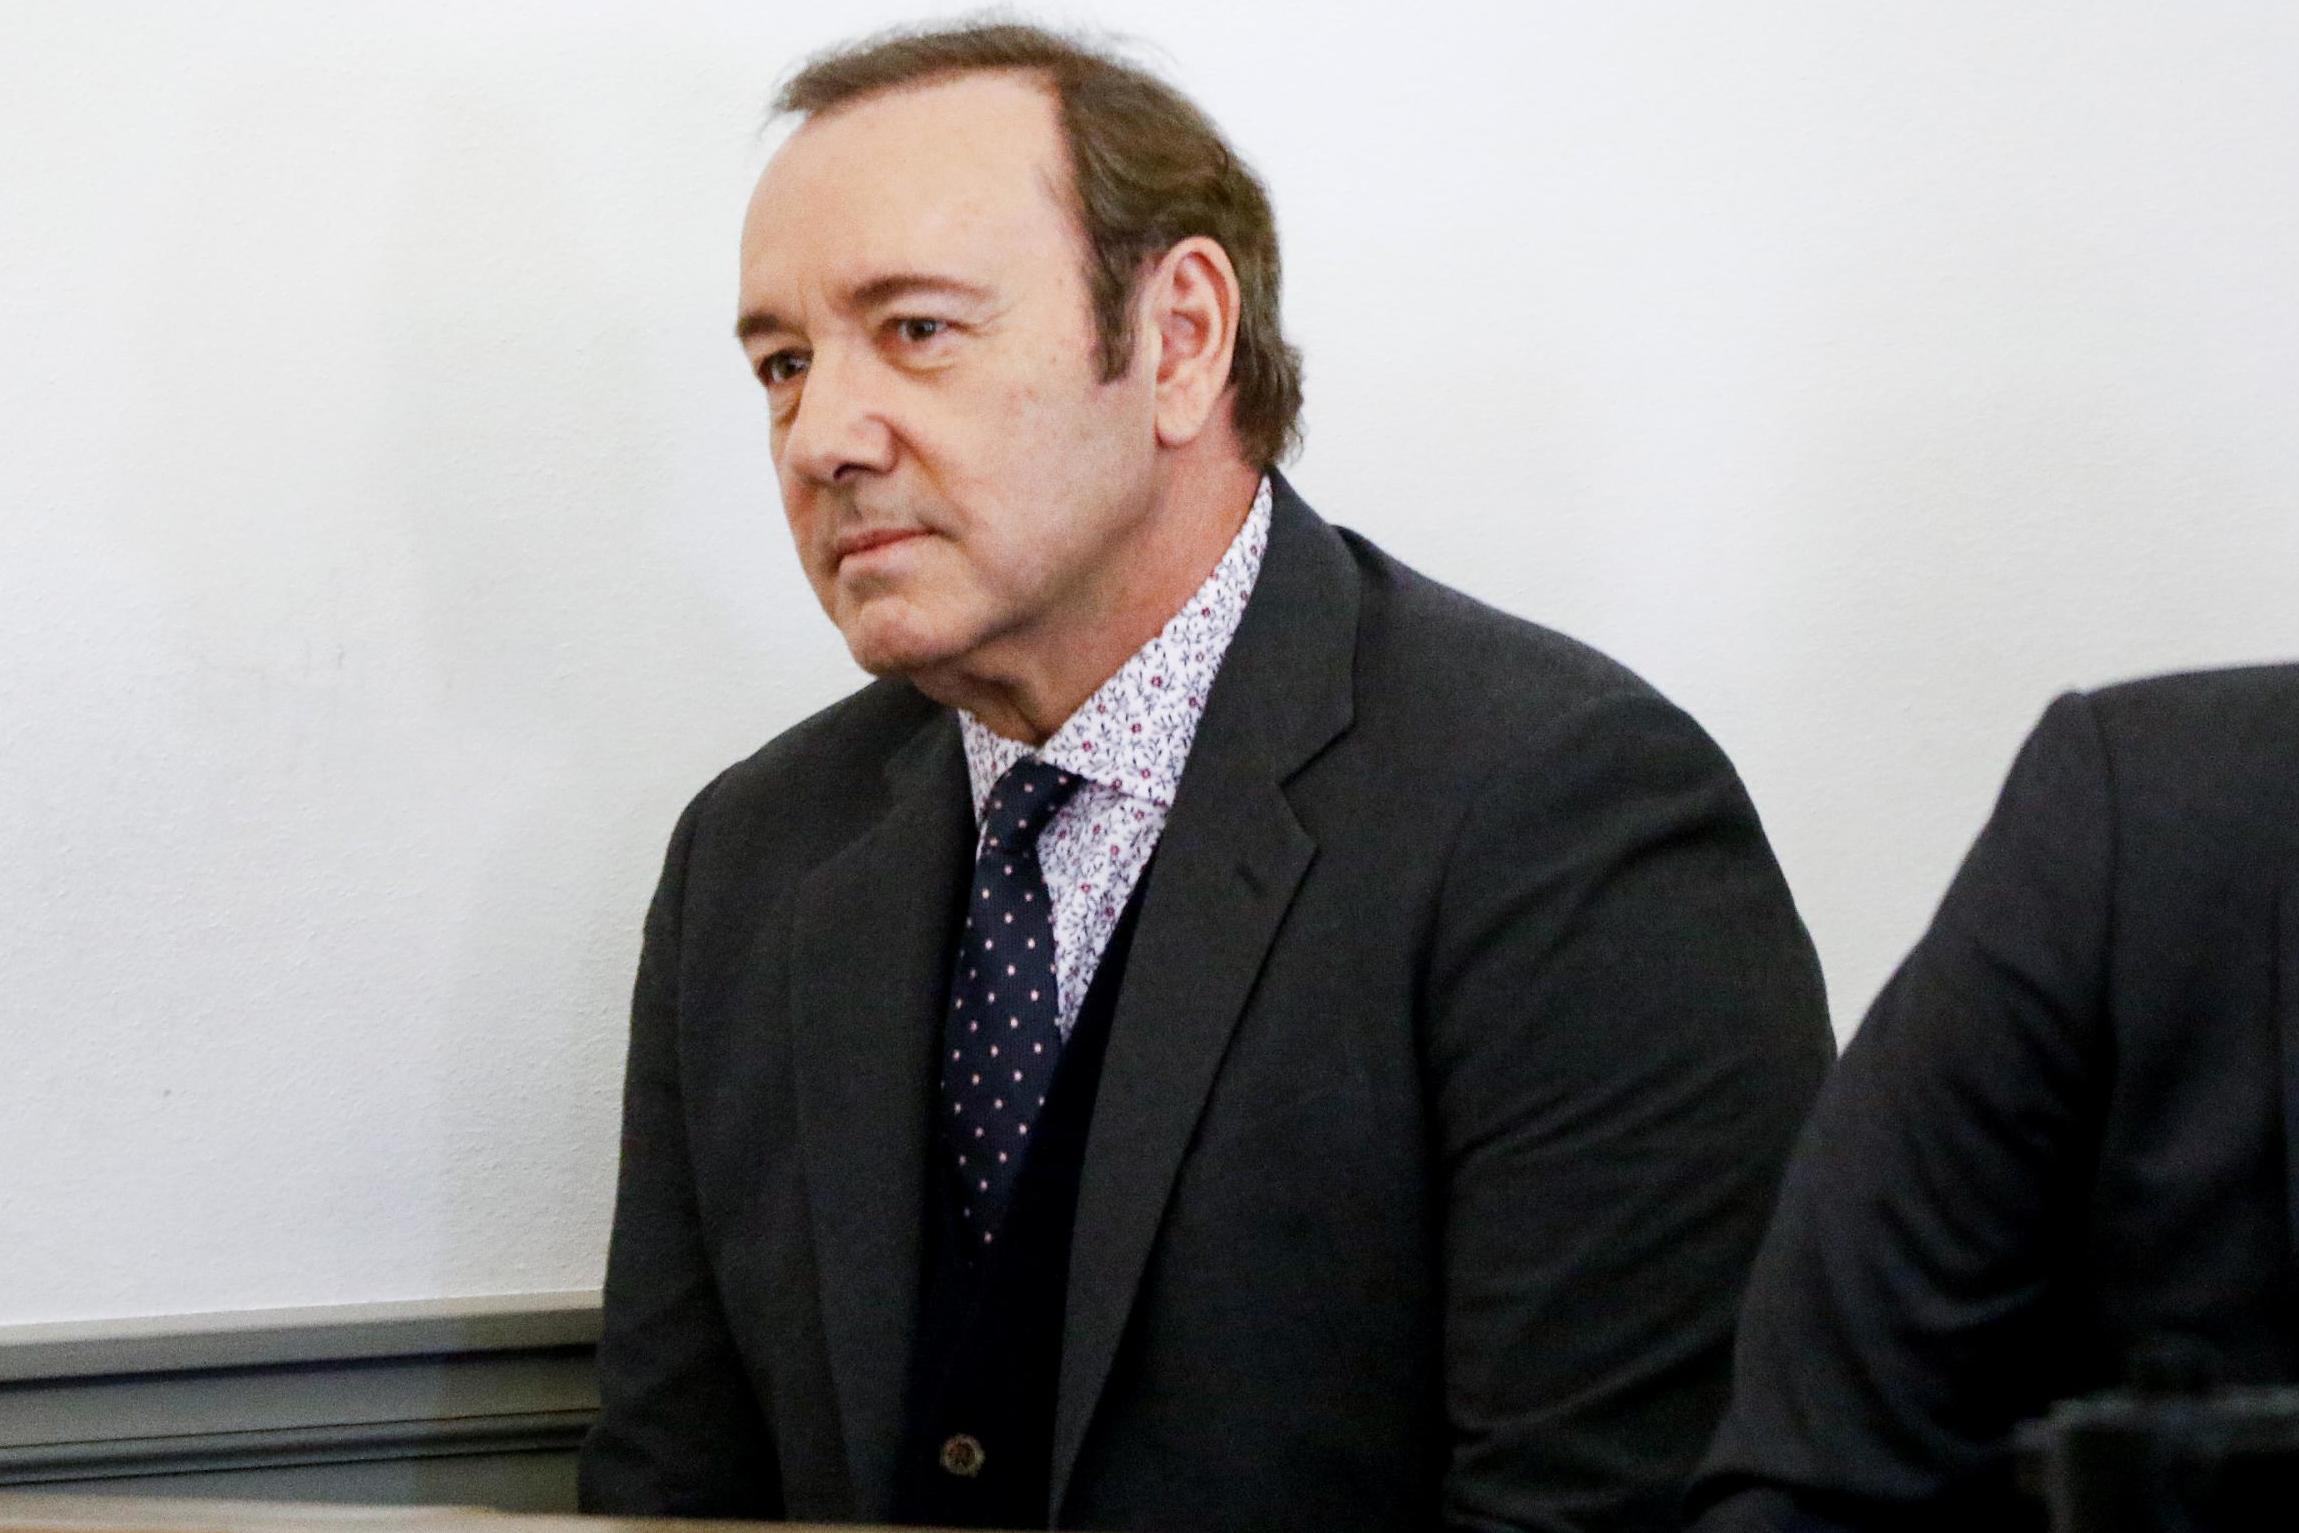 Kevin Spacey attends his arraignment for sexual assault charges at Nantucket District Court on 7 January, 2019 in Nantucket, Massachusetts.